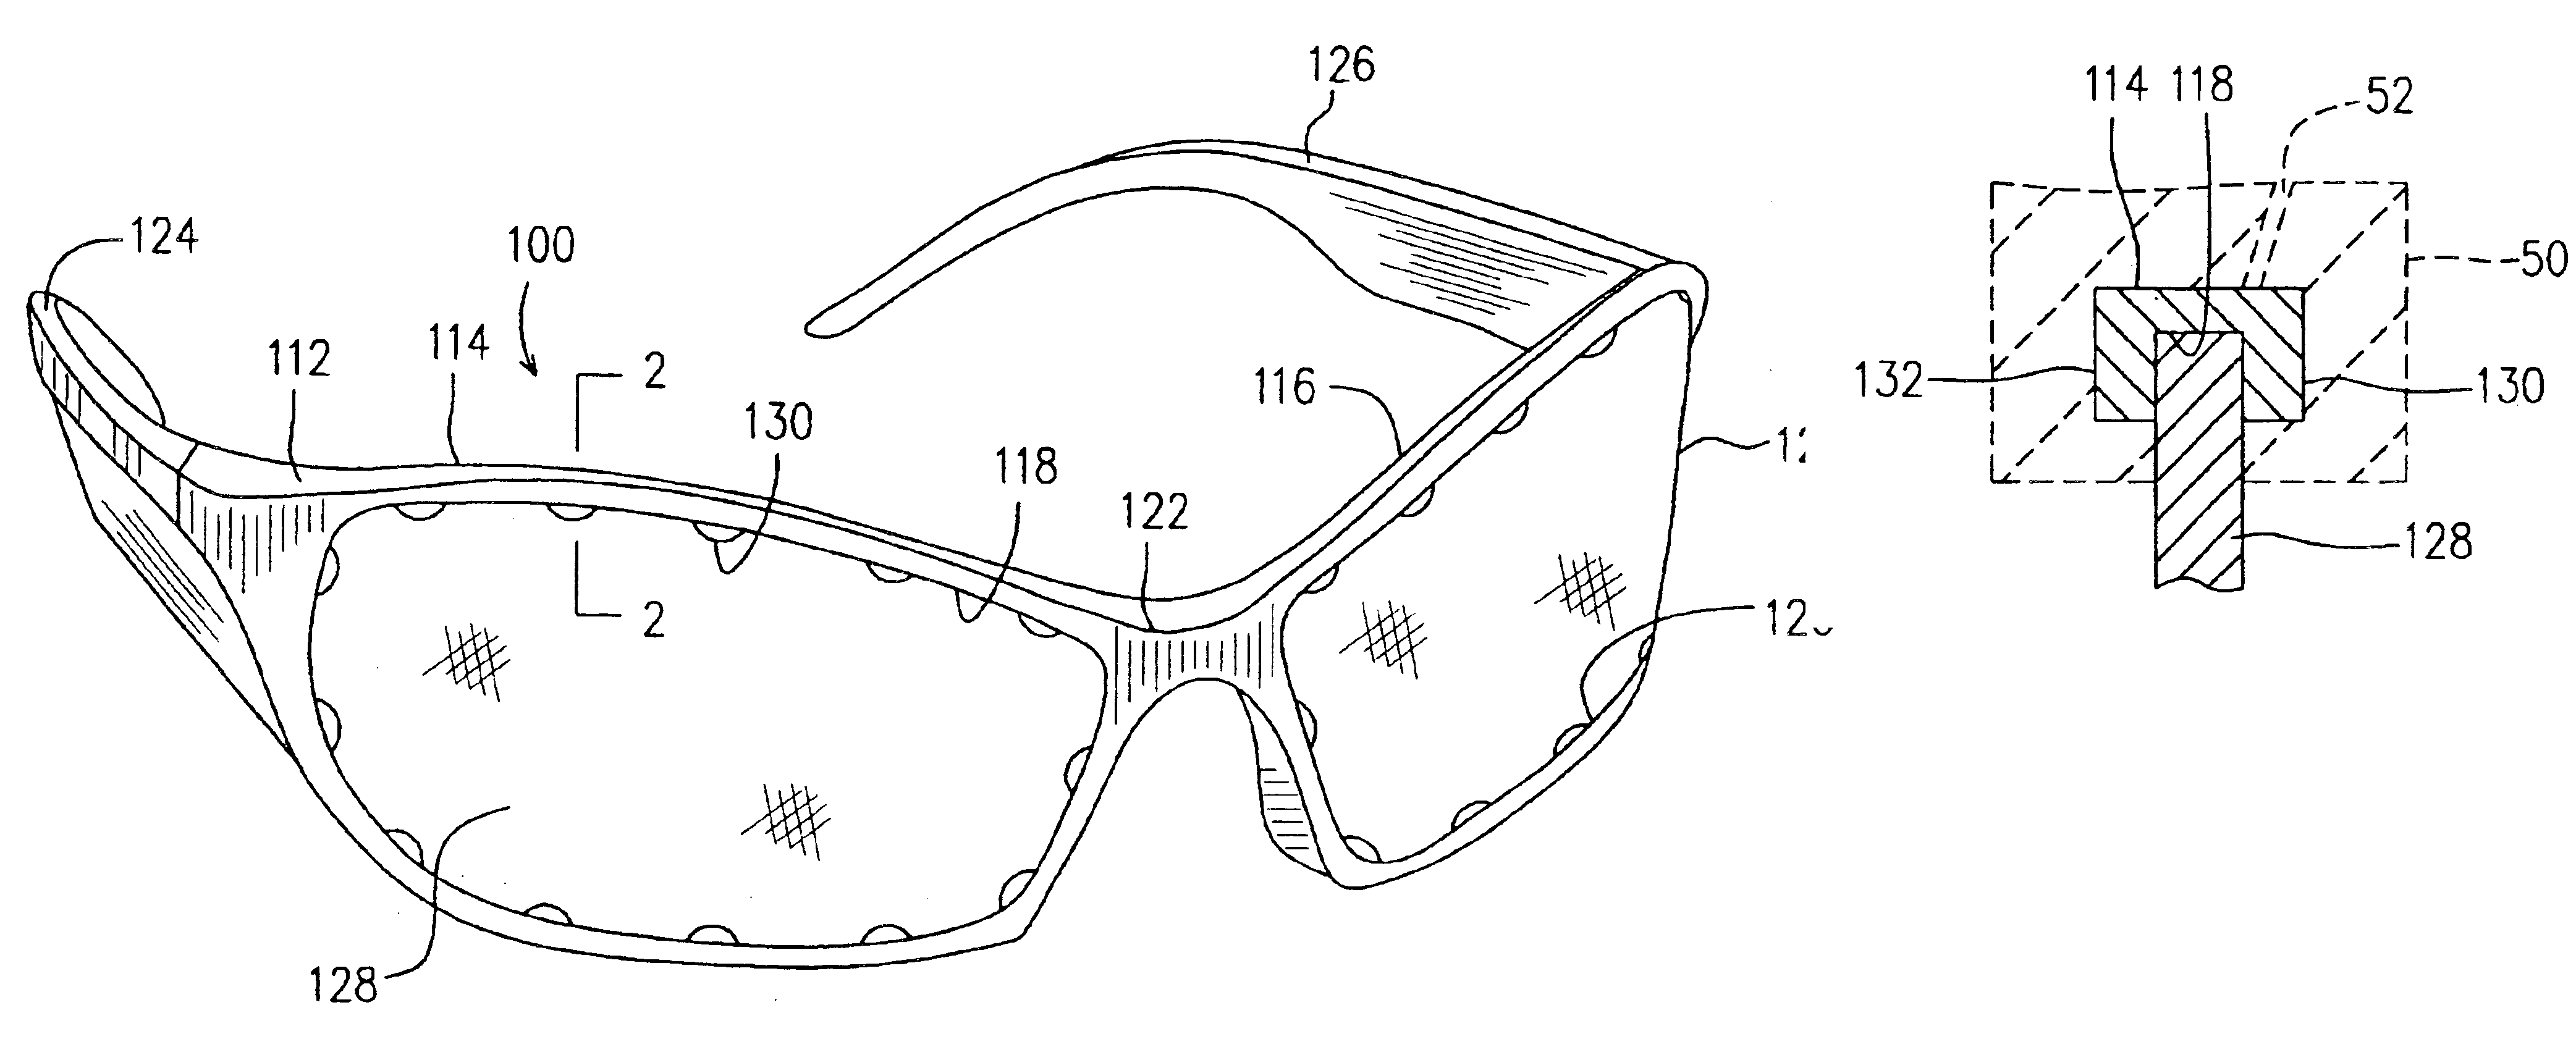 Lens attachment combined with formation of eye glasses frame